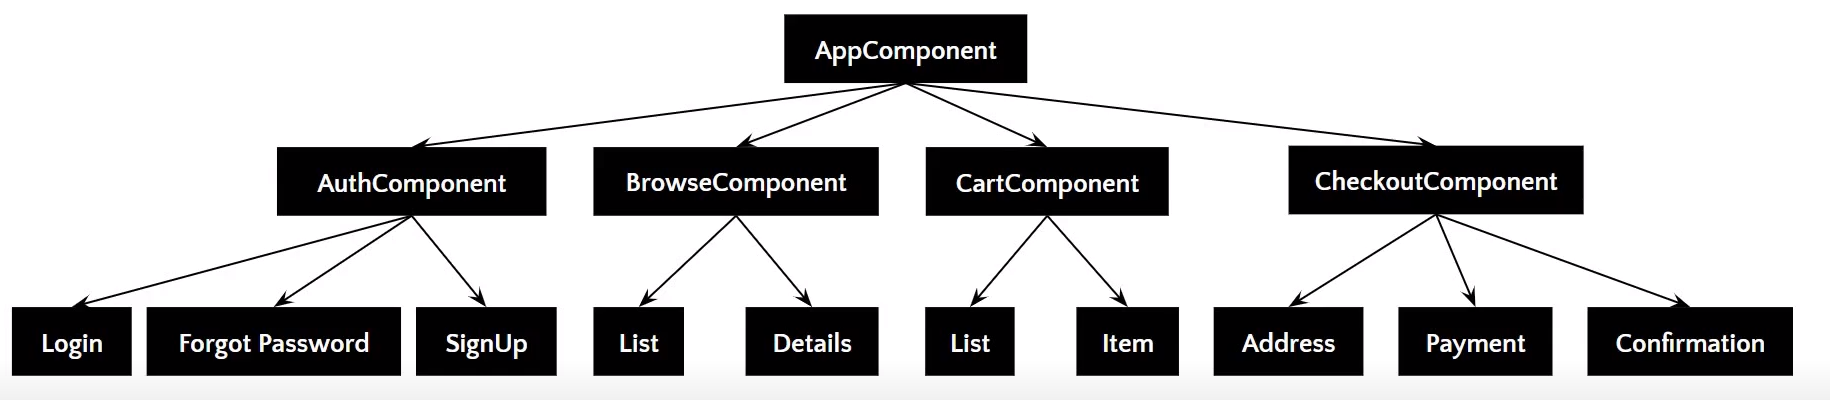 Components Heirarchy